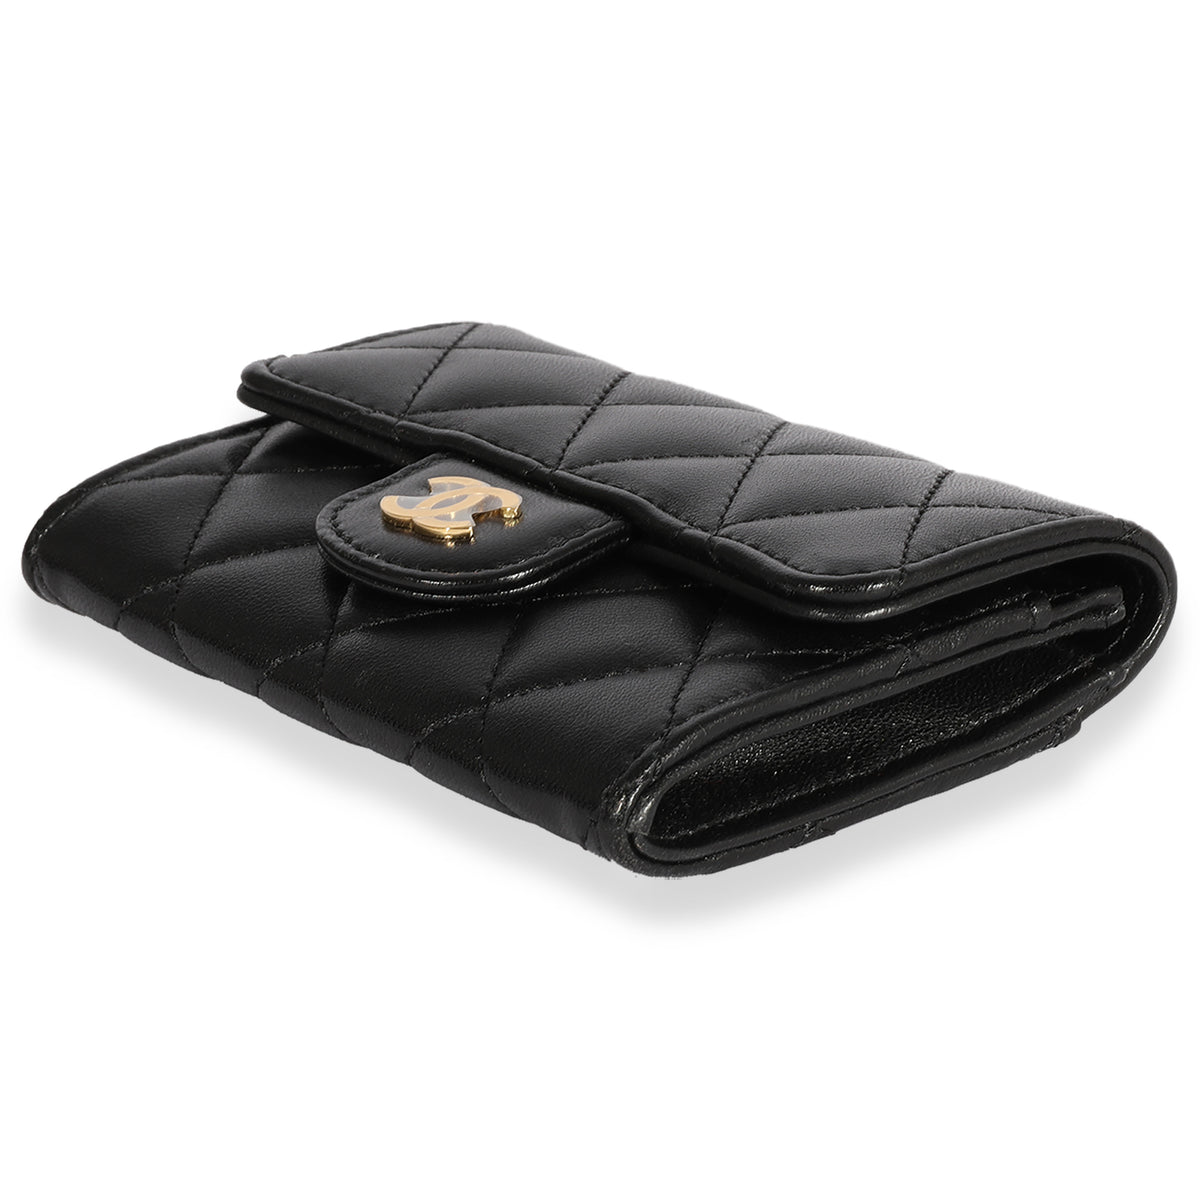 Chanel Black Quilted Lambskin Flap Card Holder Wallet, myGemma